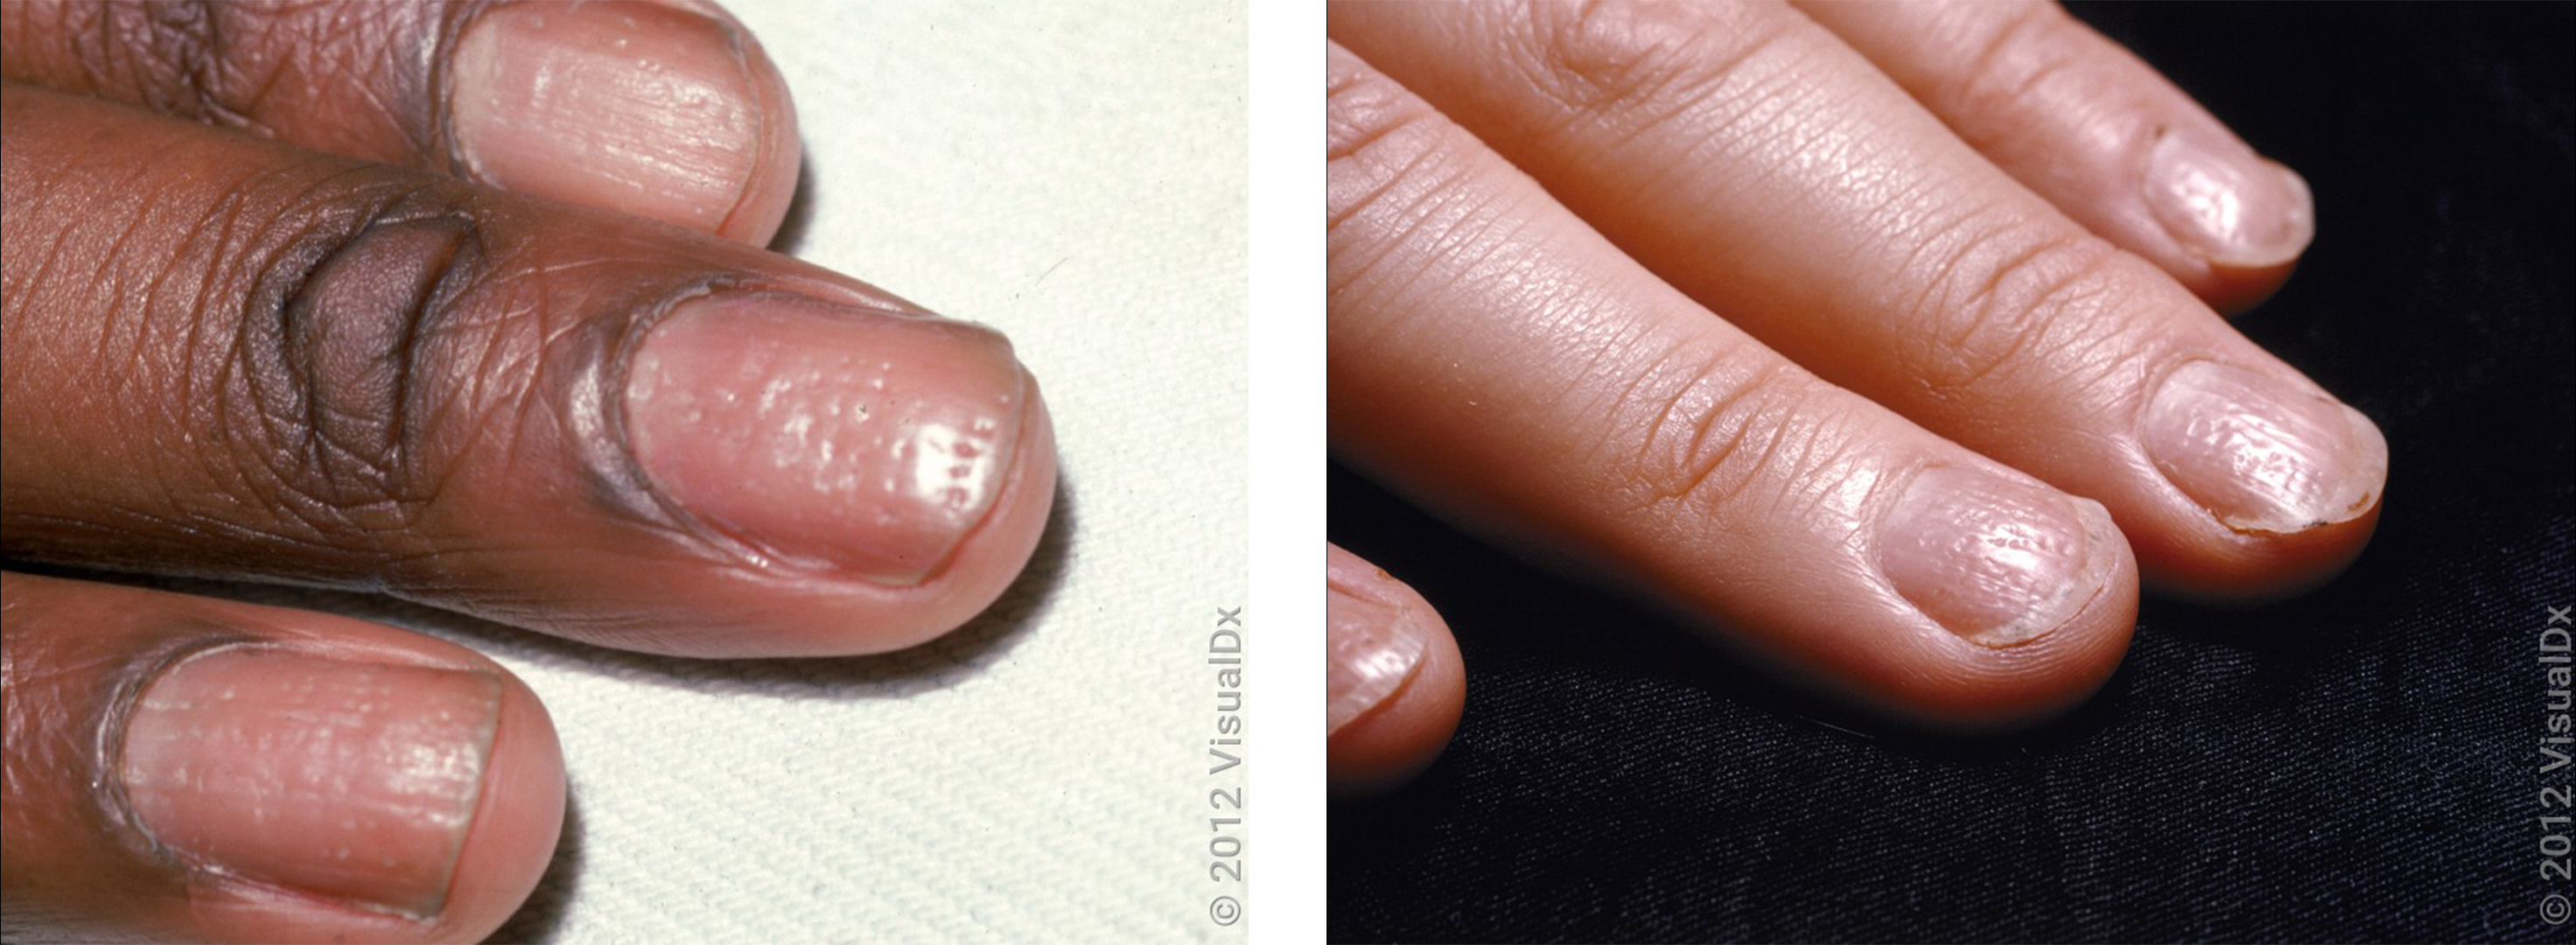 Diagnosis and Management of Nail Psoriasis